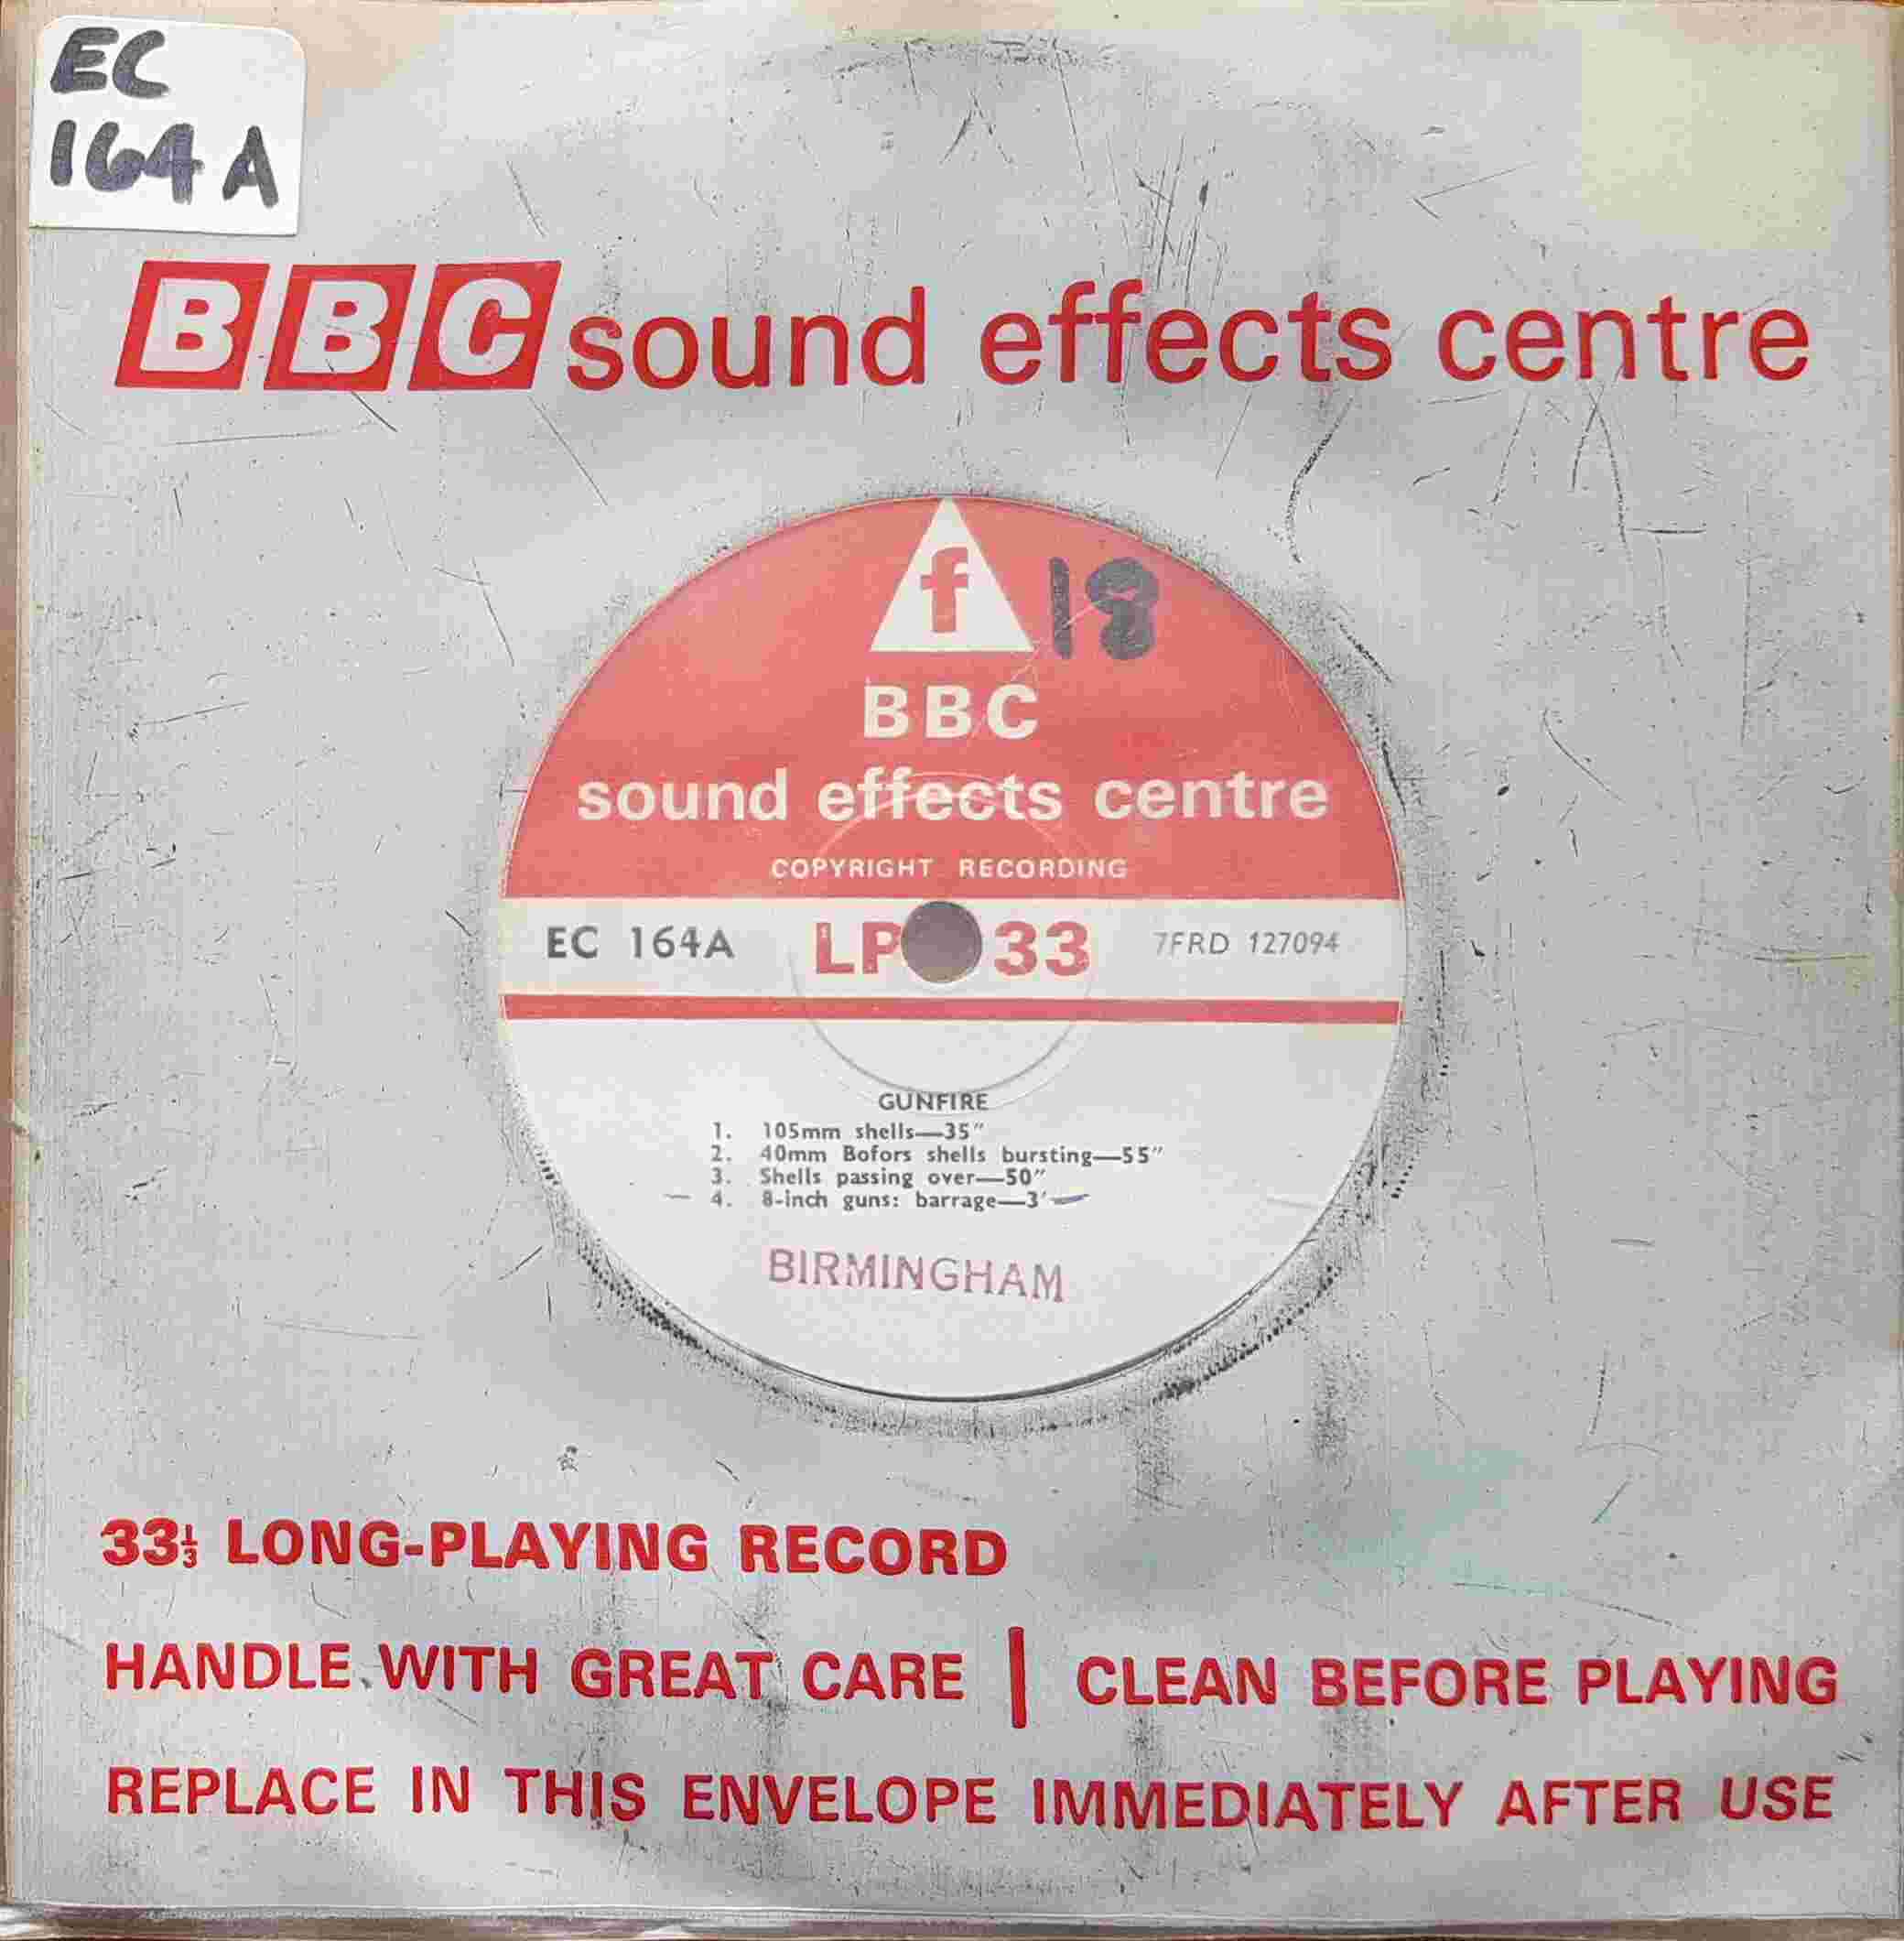 Picture of EC 164A Gunfire by artist Not registered from the BBC records and Tapes library